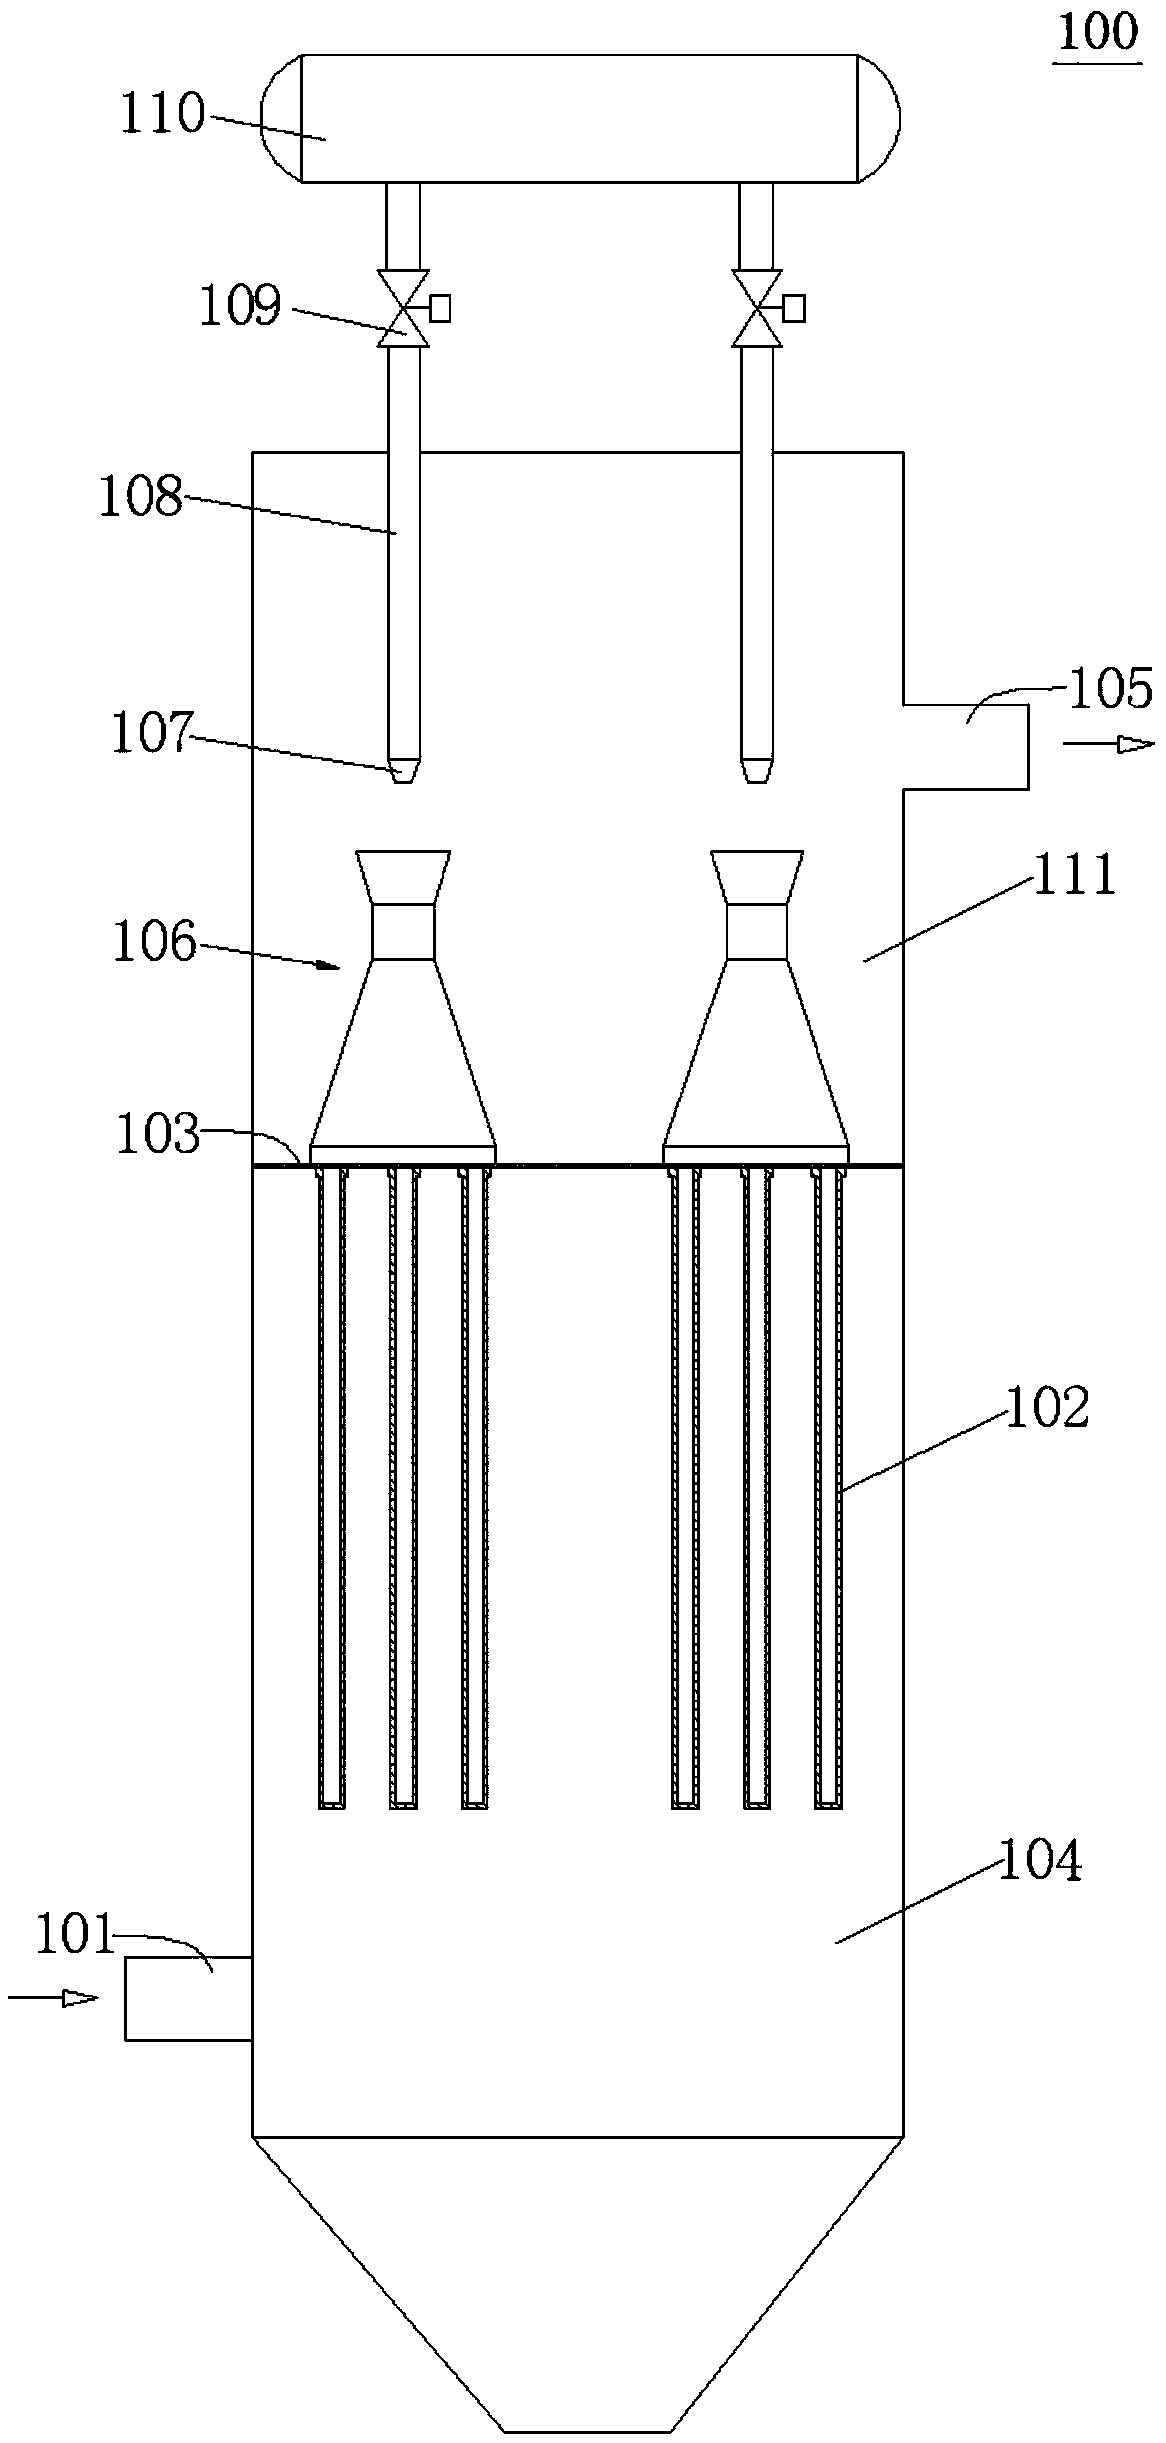 Self-direction-adjustment periodic pulse jet-flow spray nozzle and filter